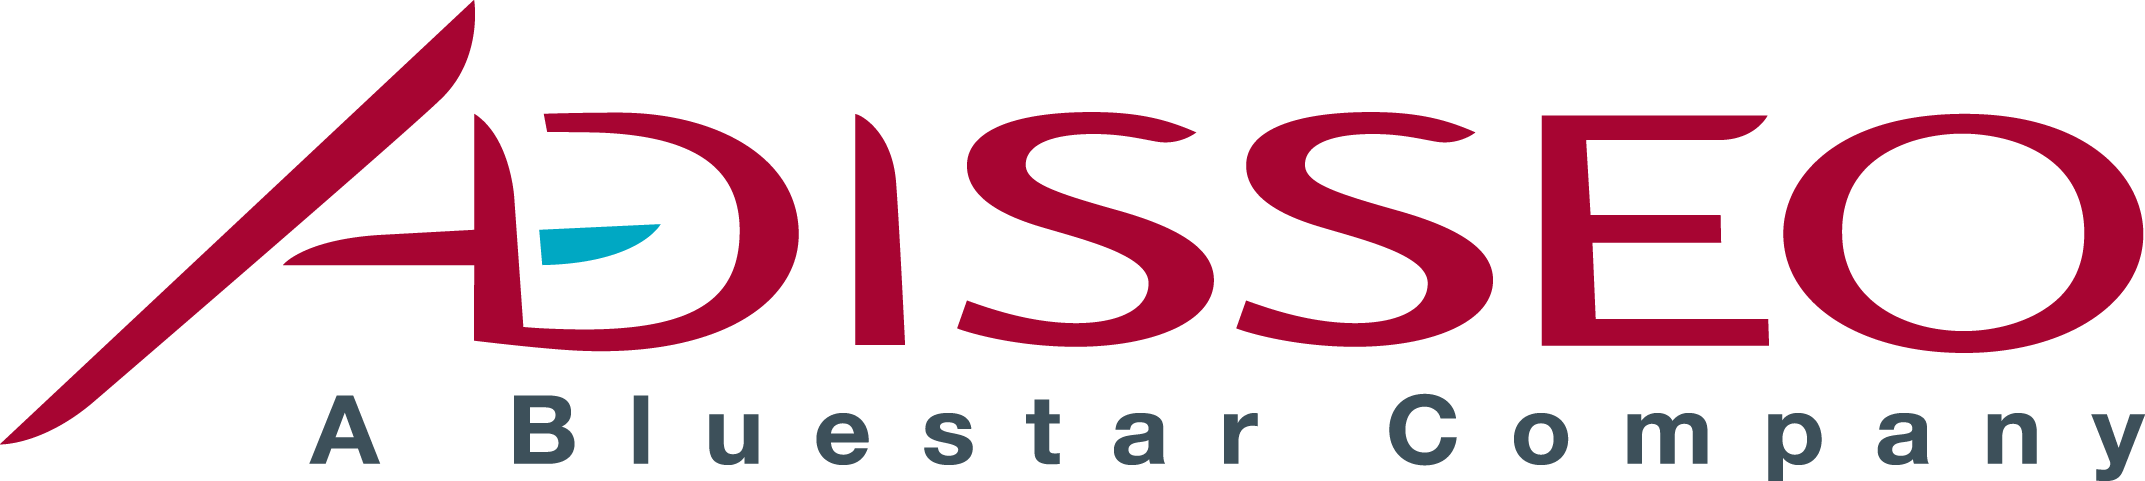 logo adisseo corporate.png